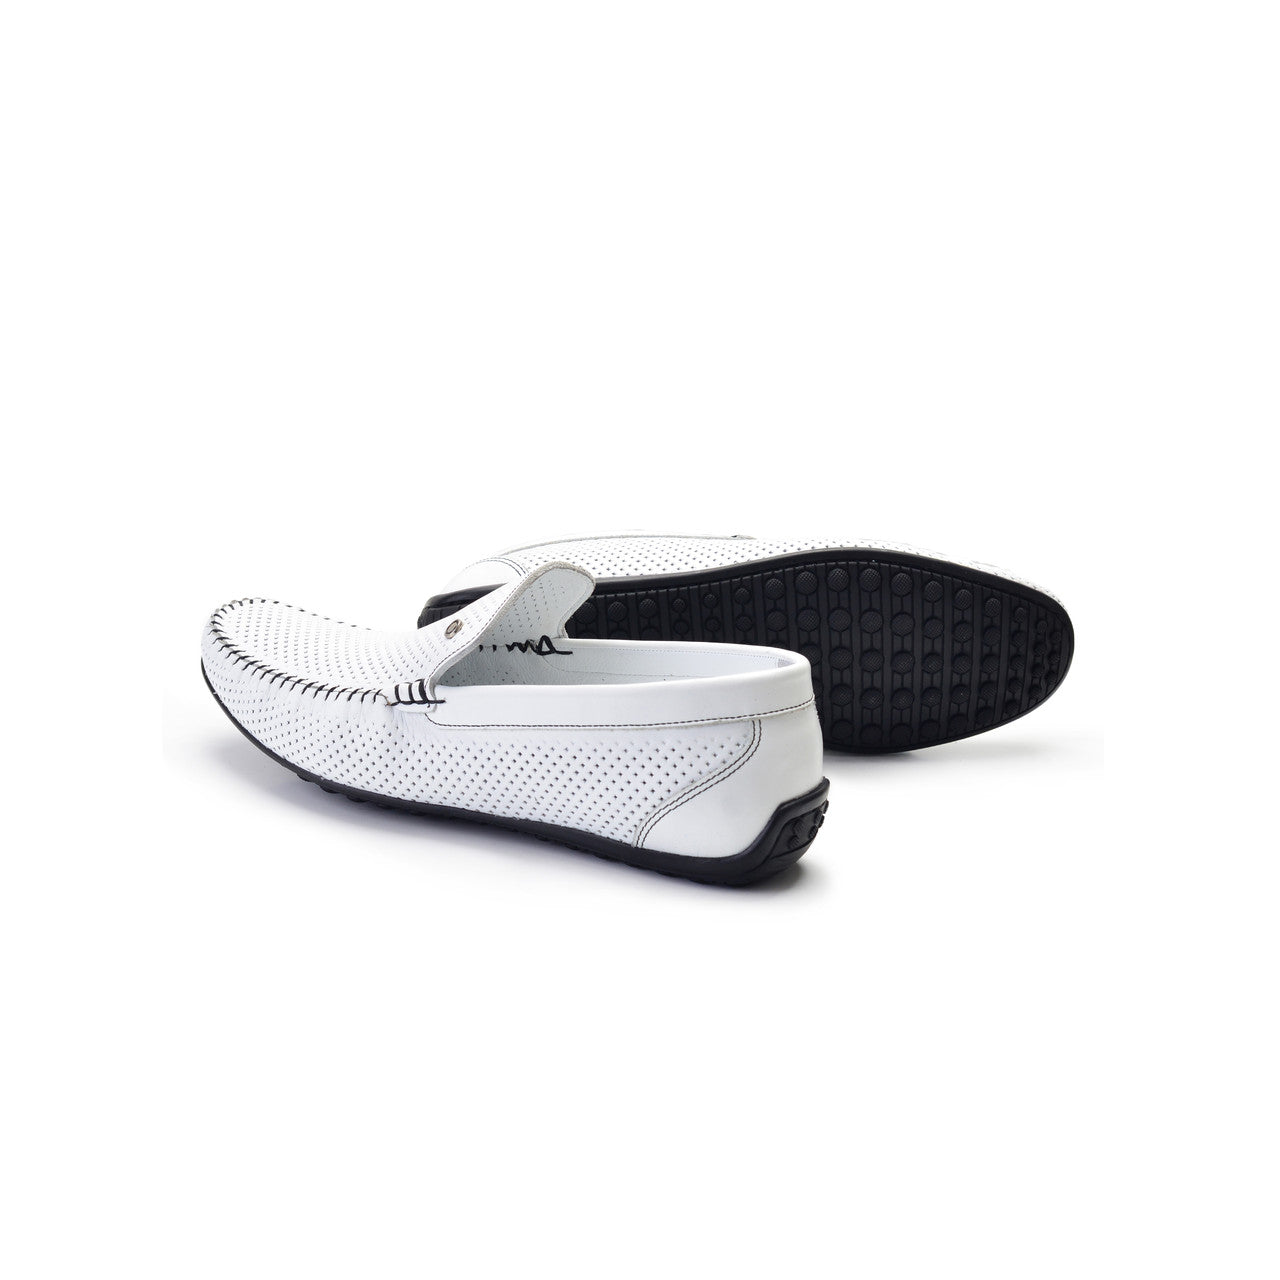 P00021- 2301 -perforated Driving shoe White